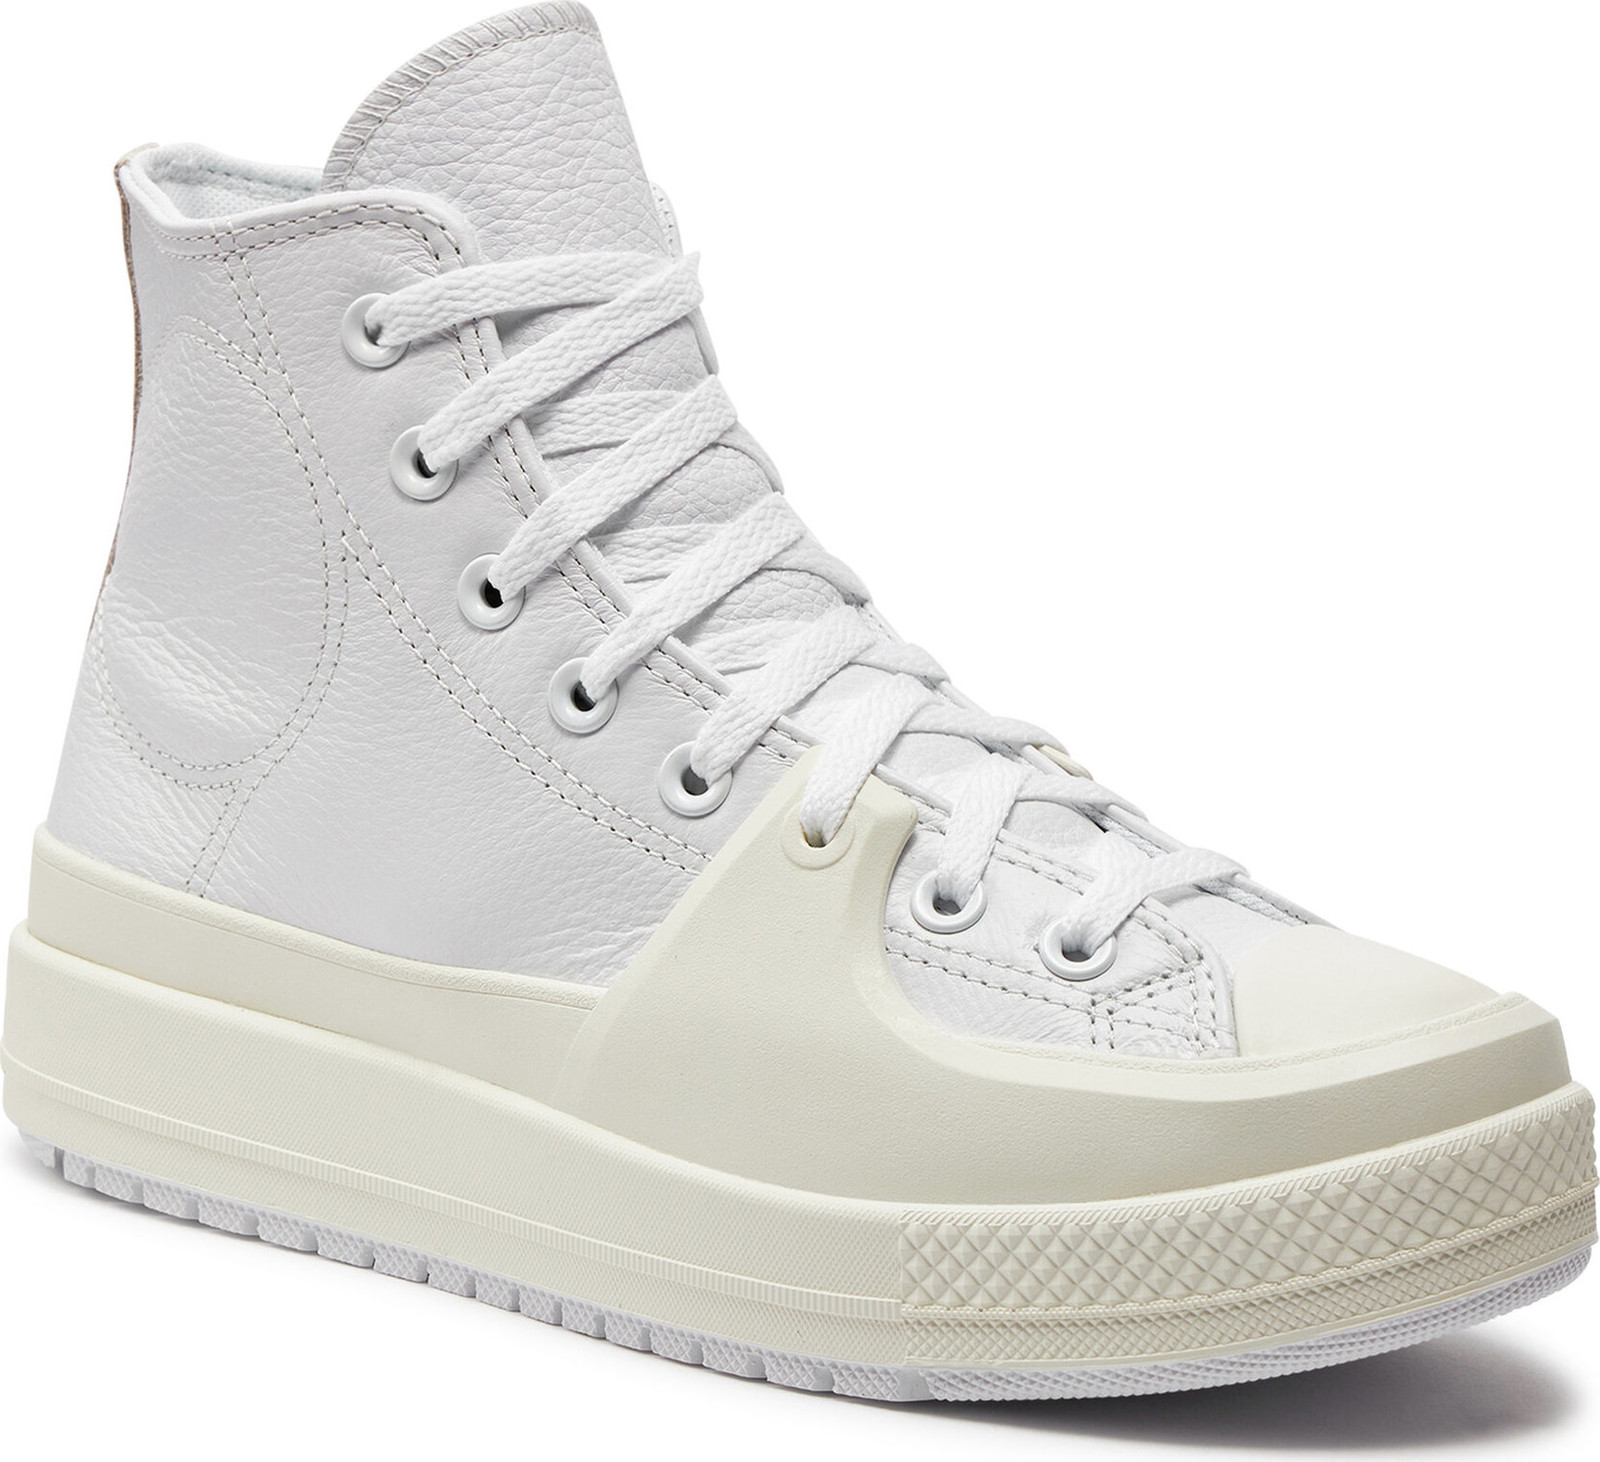 Plátěnky Converse Chuck Taylor All Star Construct Leather A02116C White/Egret/Yellow